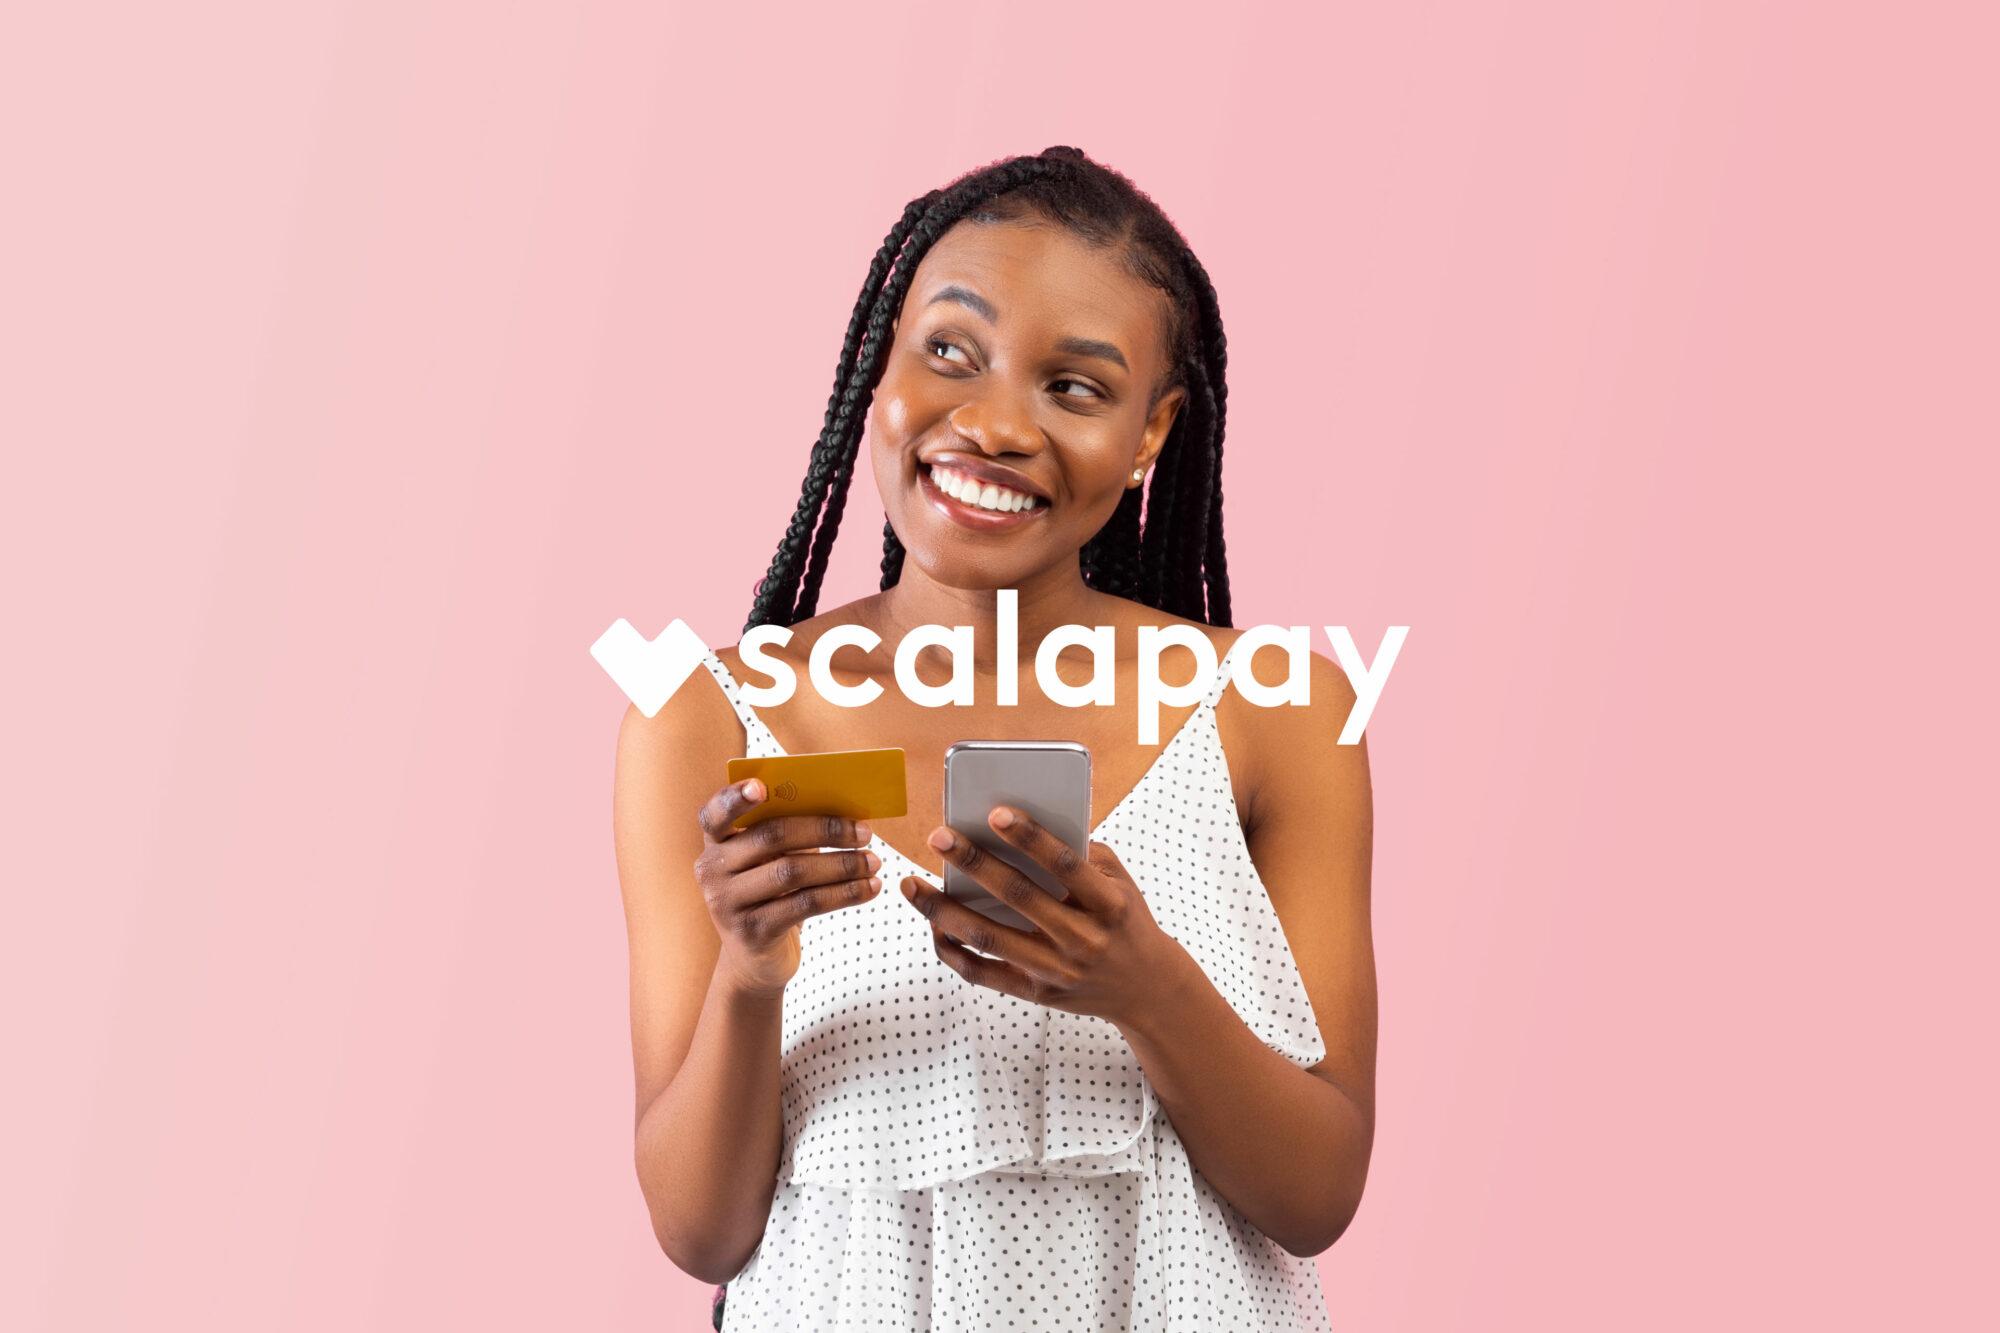 If you love it, Scalapay it